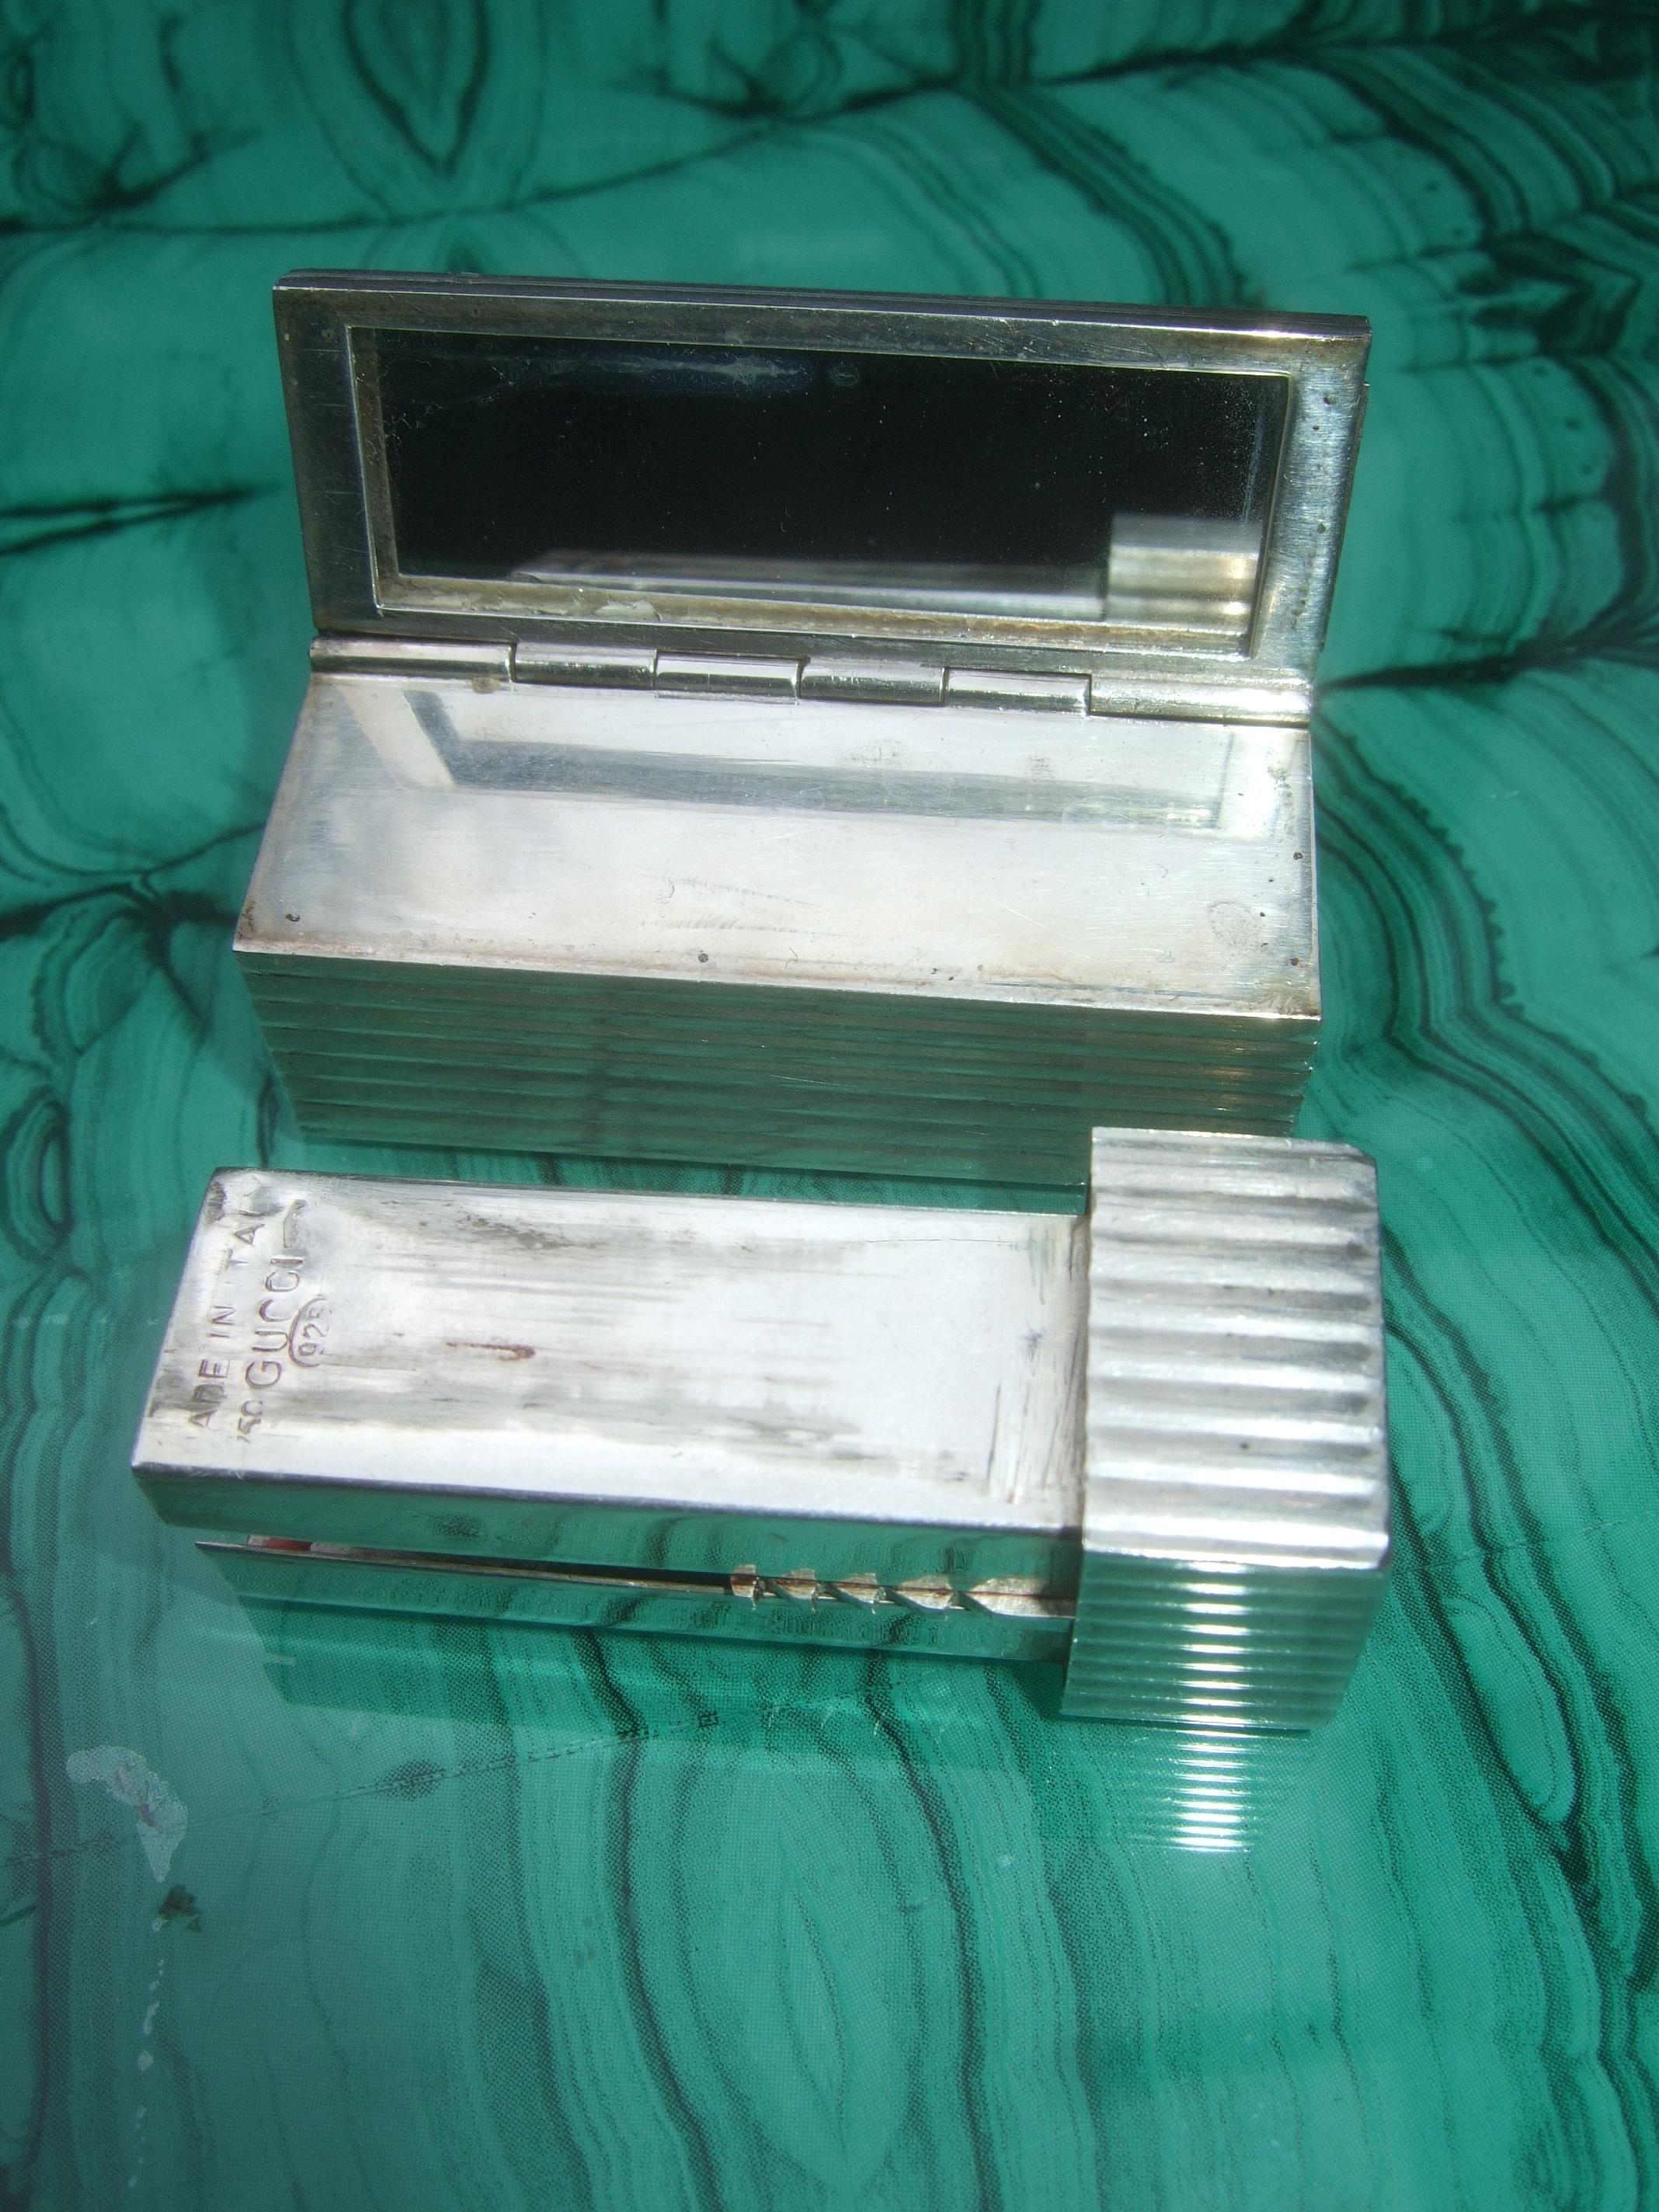 Gucci Italy Rare Sterling Silver Sleek Lipstick Vanity Mirror Case c 1970s For Sale 5